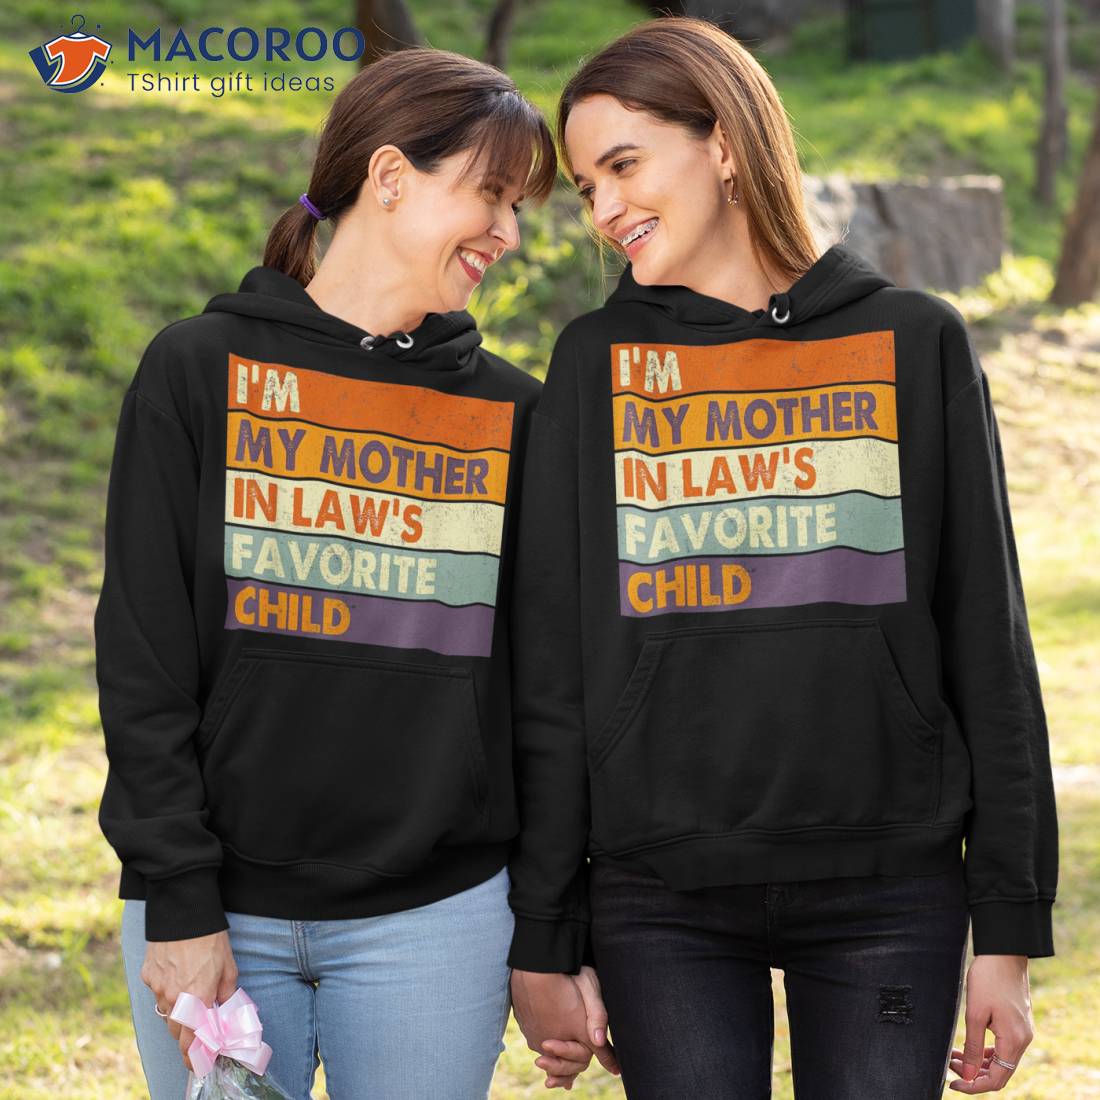 https://images.macoroo.com/wp-content/uploads/2023/05/i-m-my-mother-in-laws-favorite-child-family-mothers-day-gift-shirt-hoodie-1.jpg